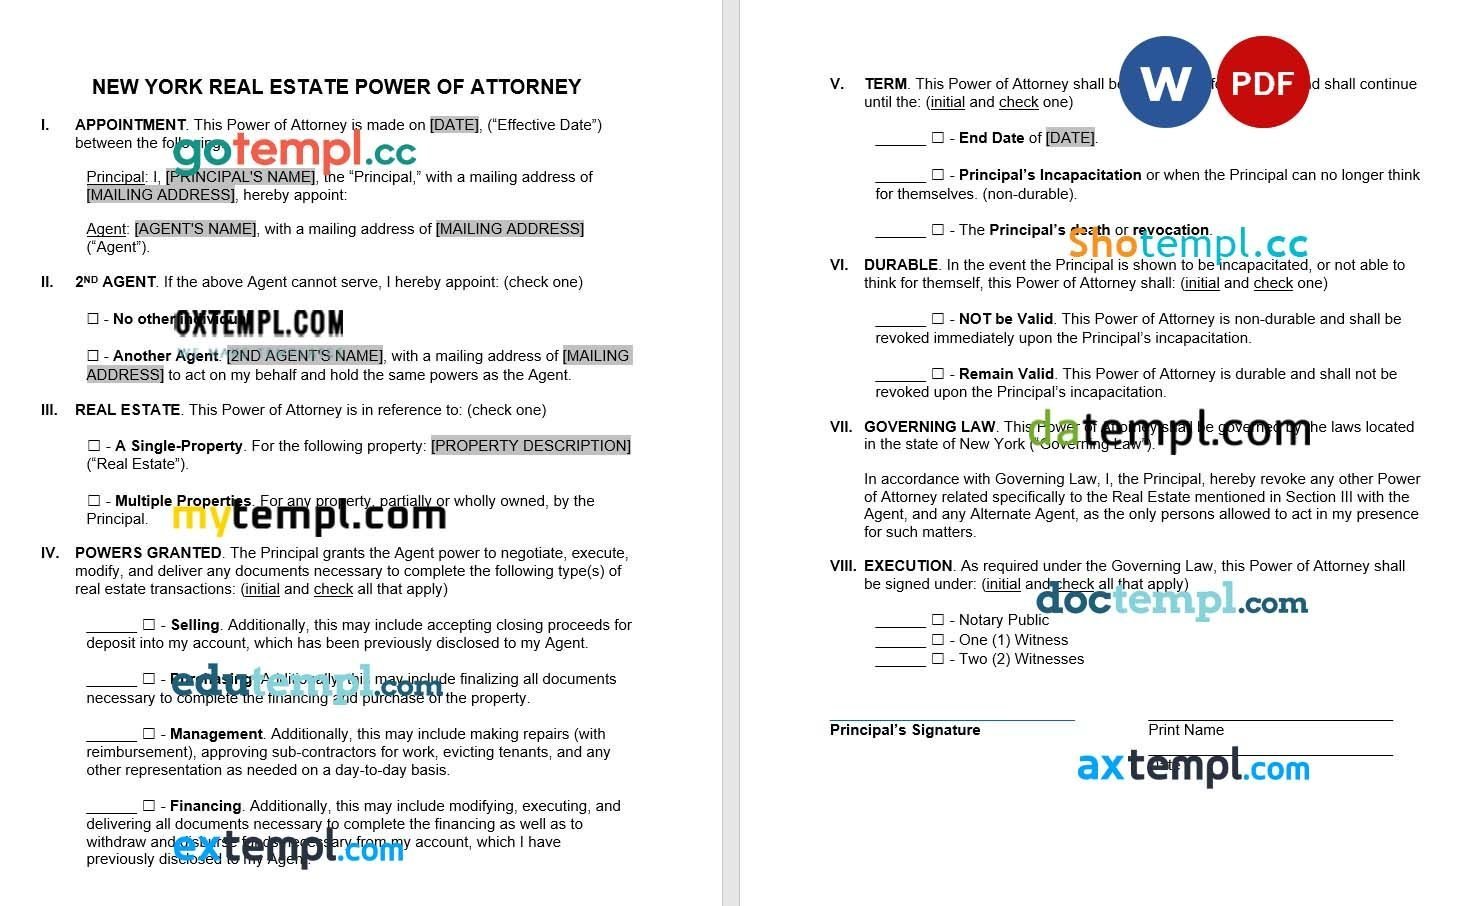 New York Real Estate Power of Attorney Form example, fully editable